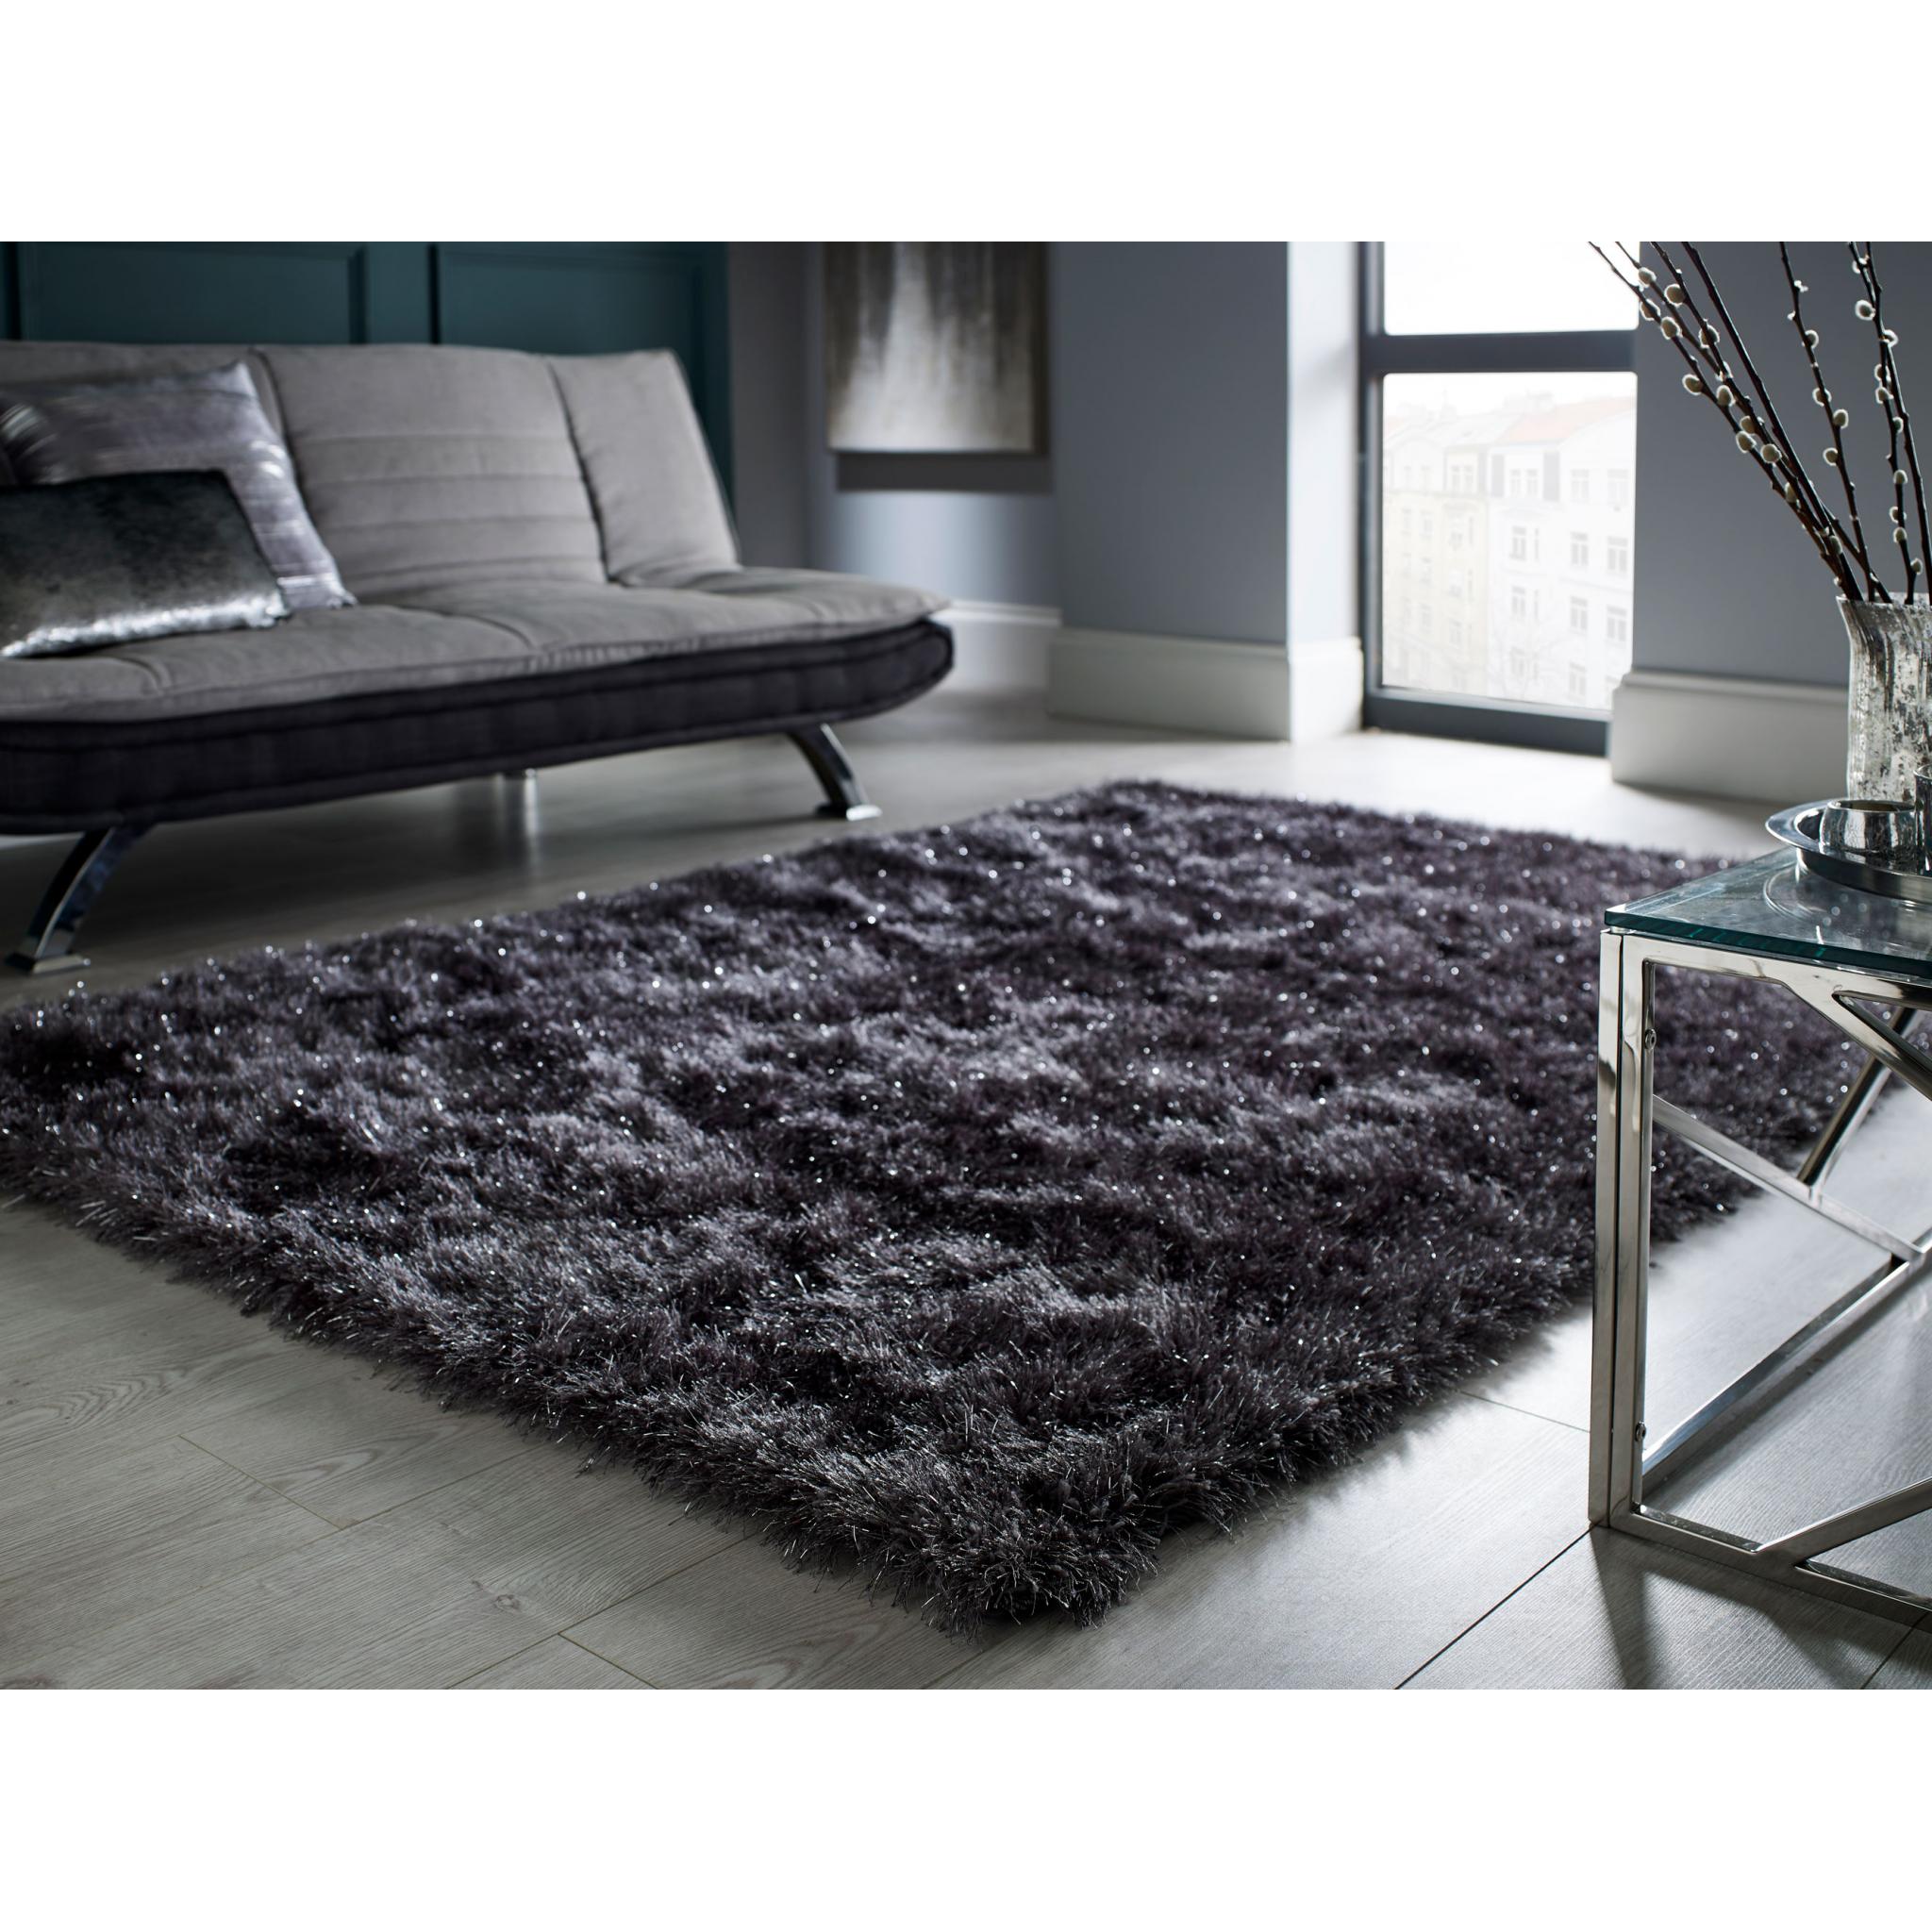 DAZZLE SPARKLE CHARCOAL SILKY SOFT PILE  SHAGGY RUG available in various sizes 